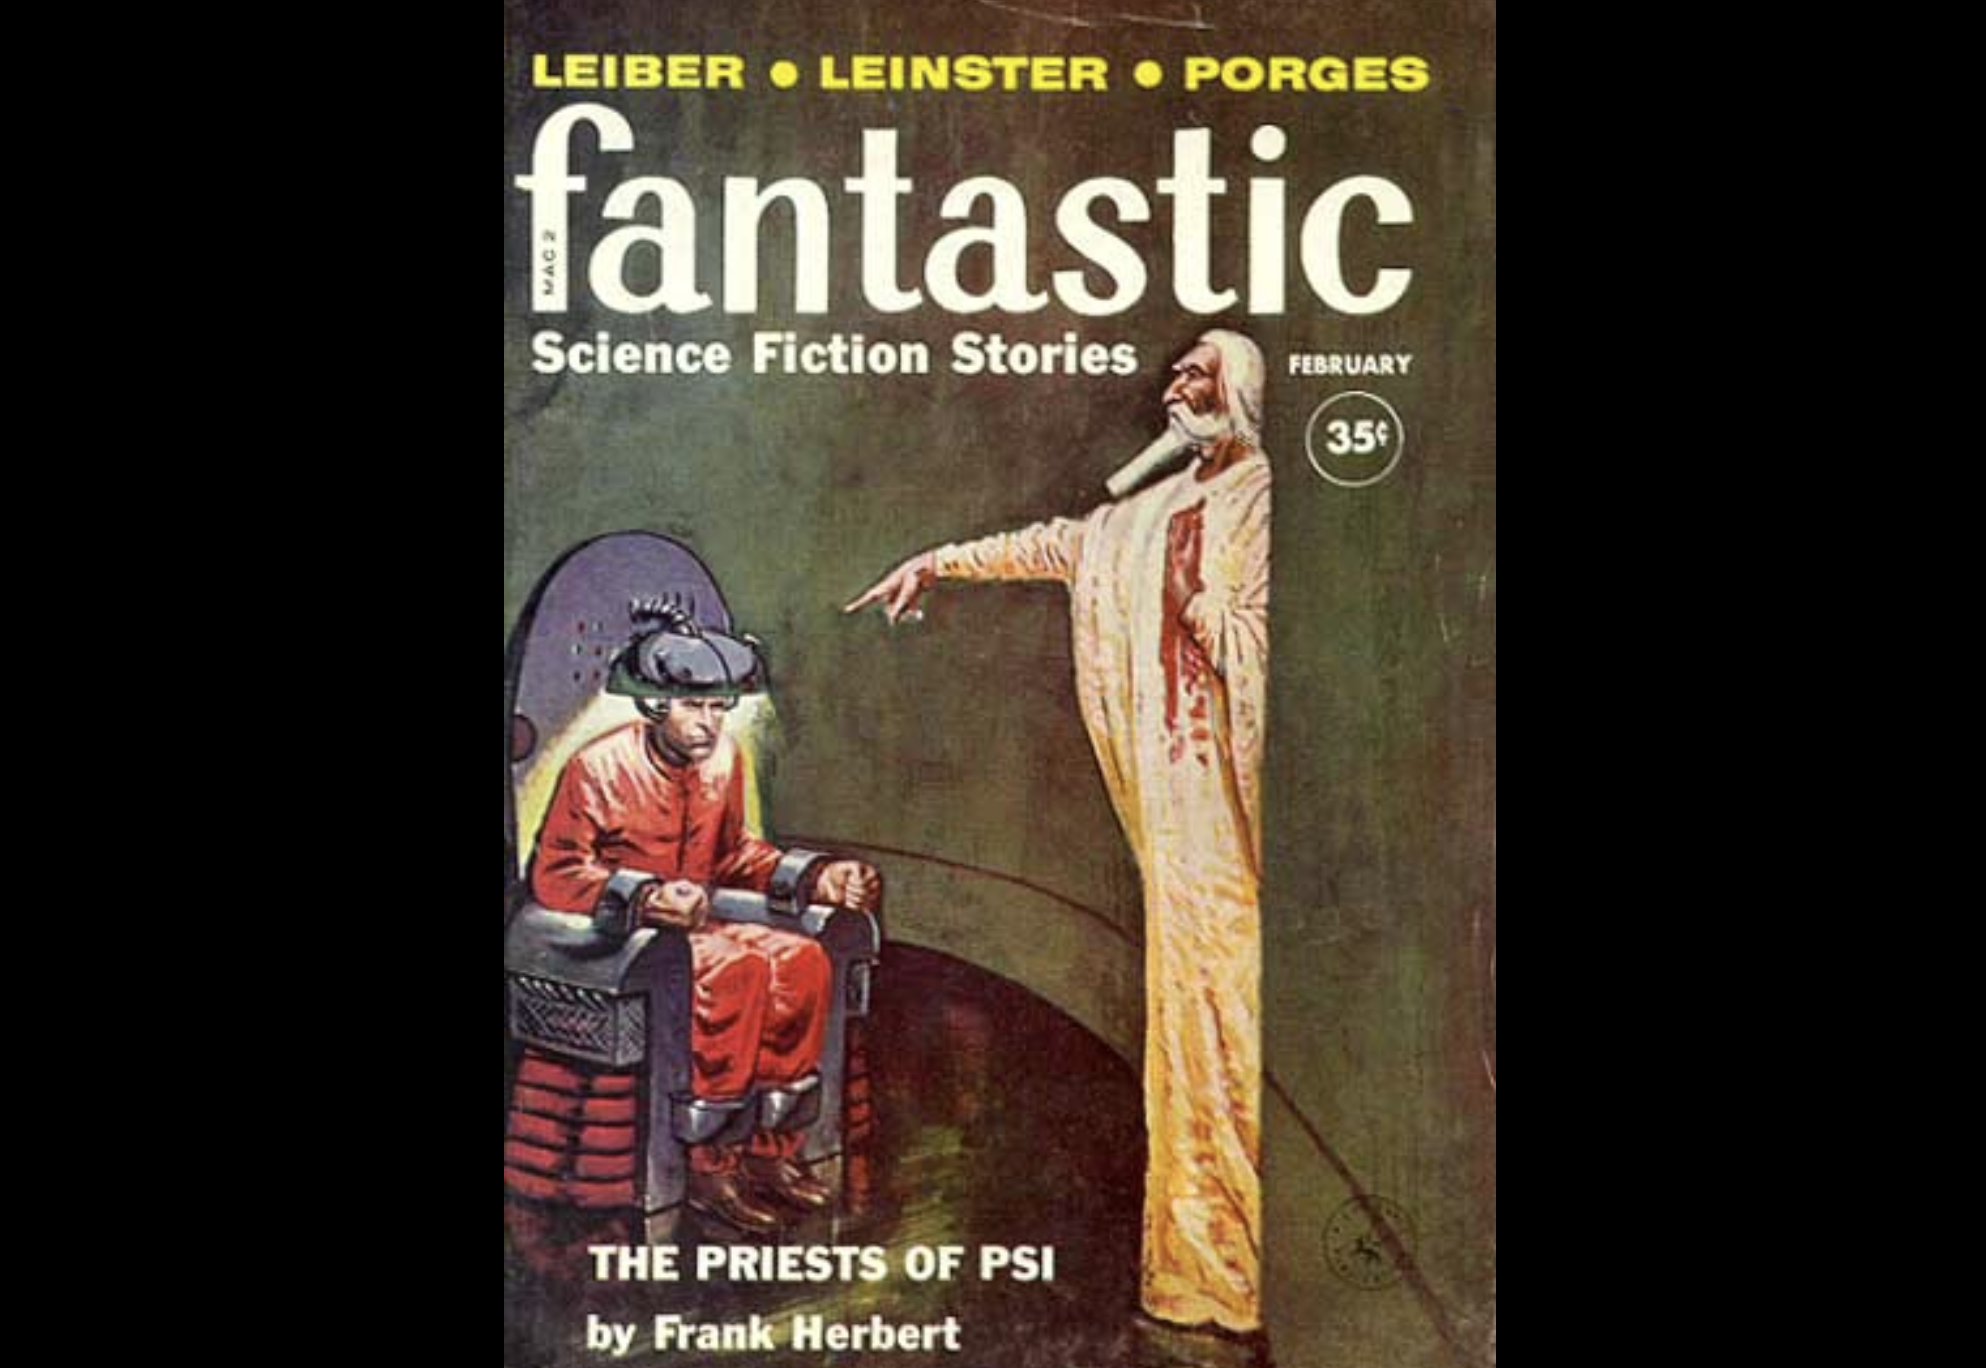 The cover of the February 1960 edition of Fantastic magazine, featuring Frank Herbert’s story, The Priests of Psi—in which protagonist Lewis Orne is recruited by the galactic government to investigate a mysterious planet ruled by powerful priests. 